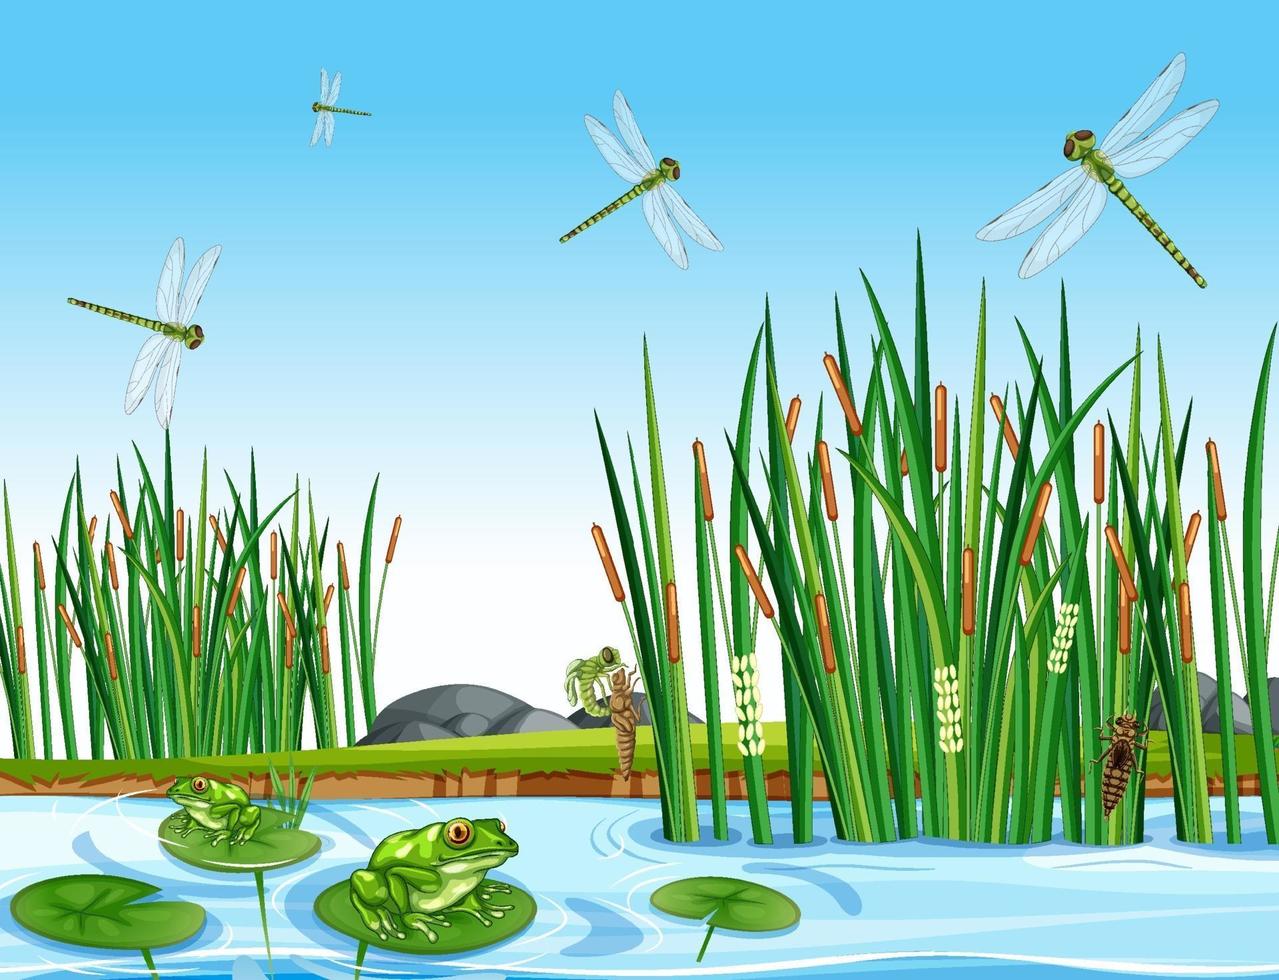 Many green frogs and dragonfly in the pond scene vector